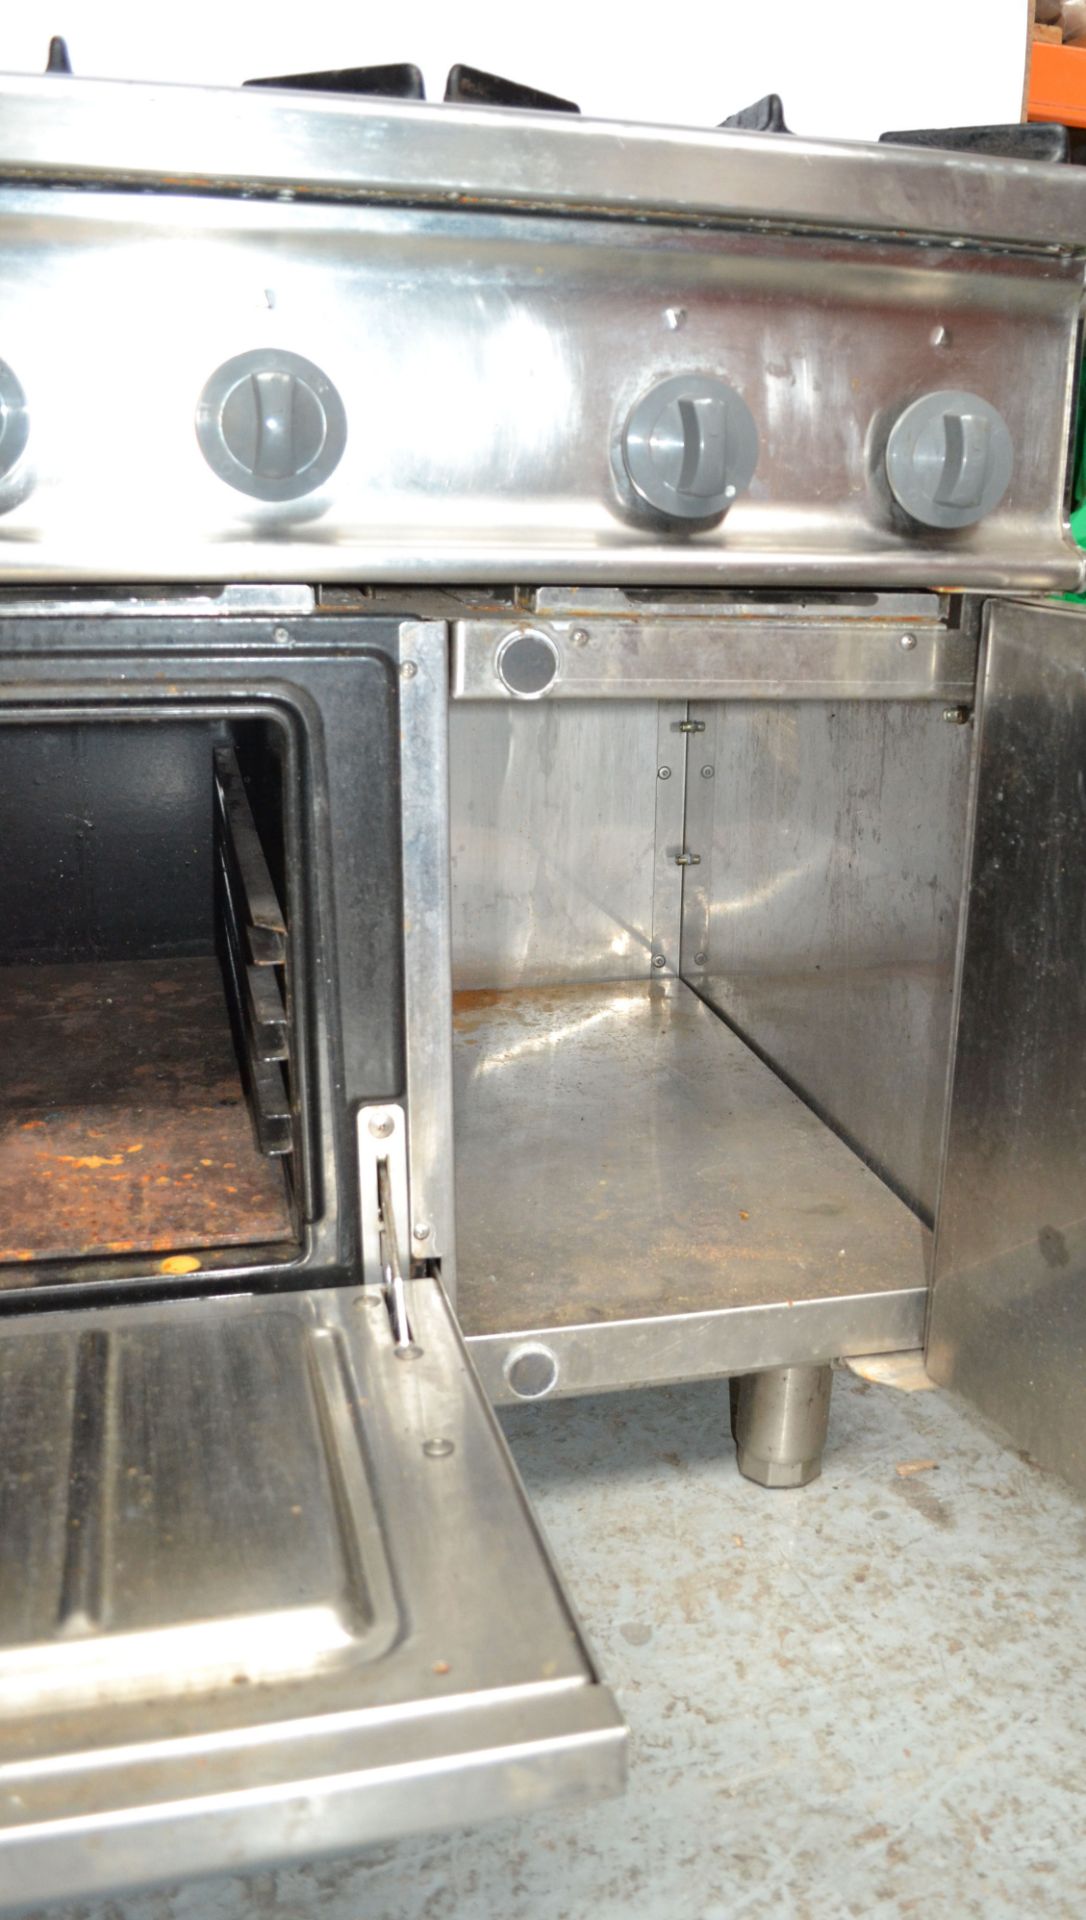 1 x Fagor Six Burner Gas Oven Range (CG-761 BR SM) - Ref NCE011 - CL178 - Location: Altrincham - Image 10 of 15